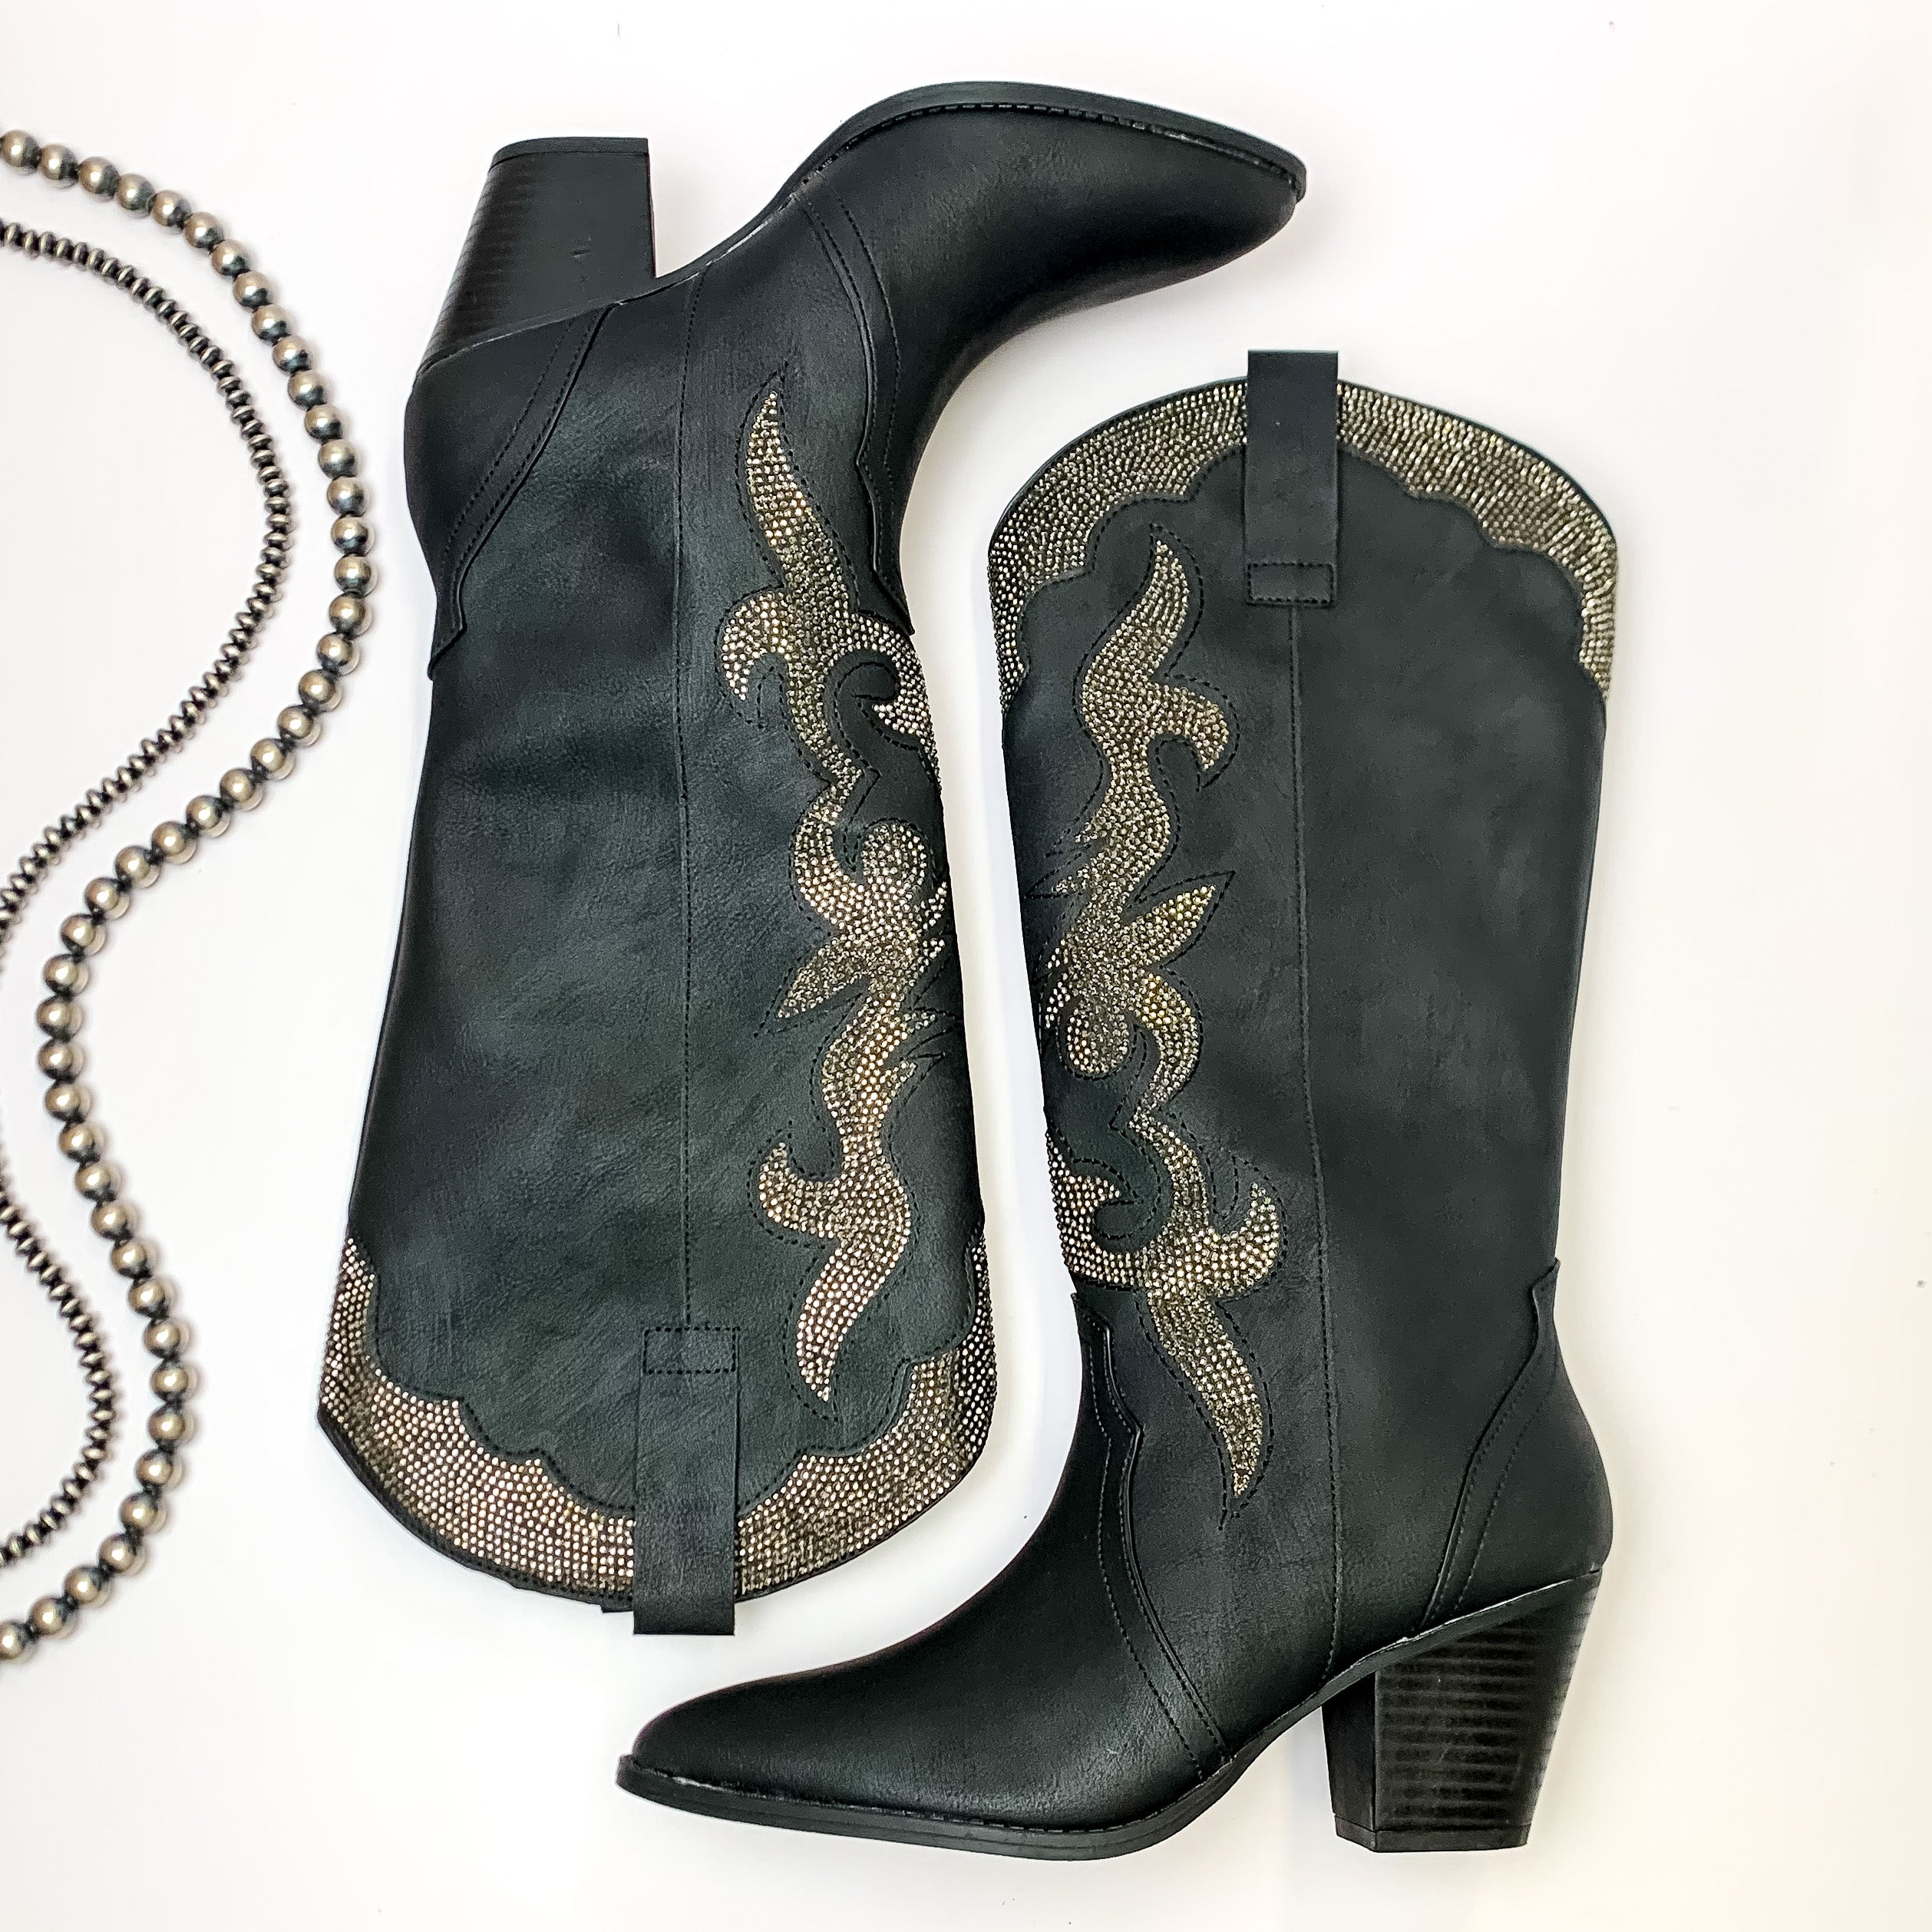 Lonestar Beauty Western Stitch Boots with Charcoal Crystal Embellishment in Black - Giddy Up Glamour Boutique